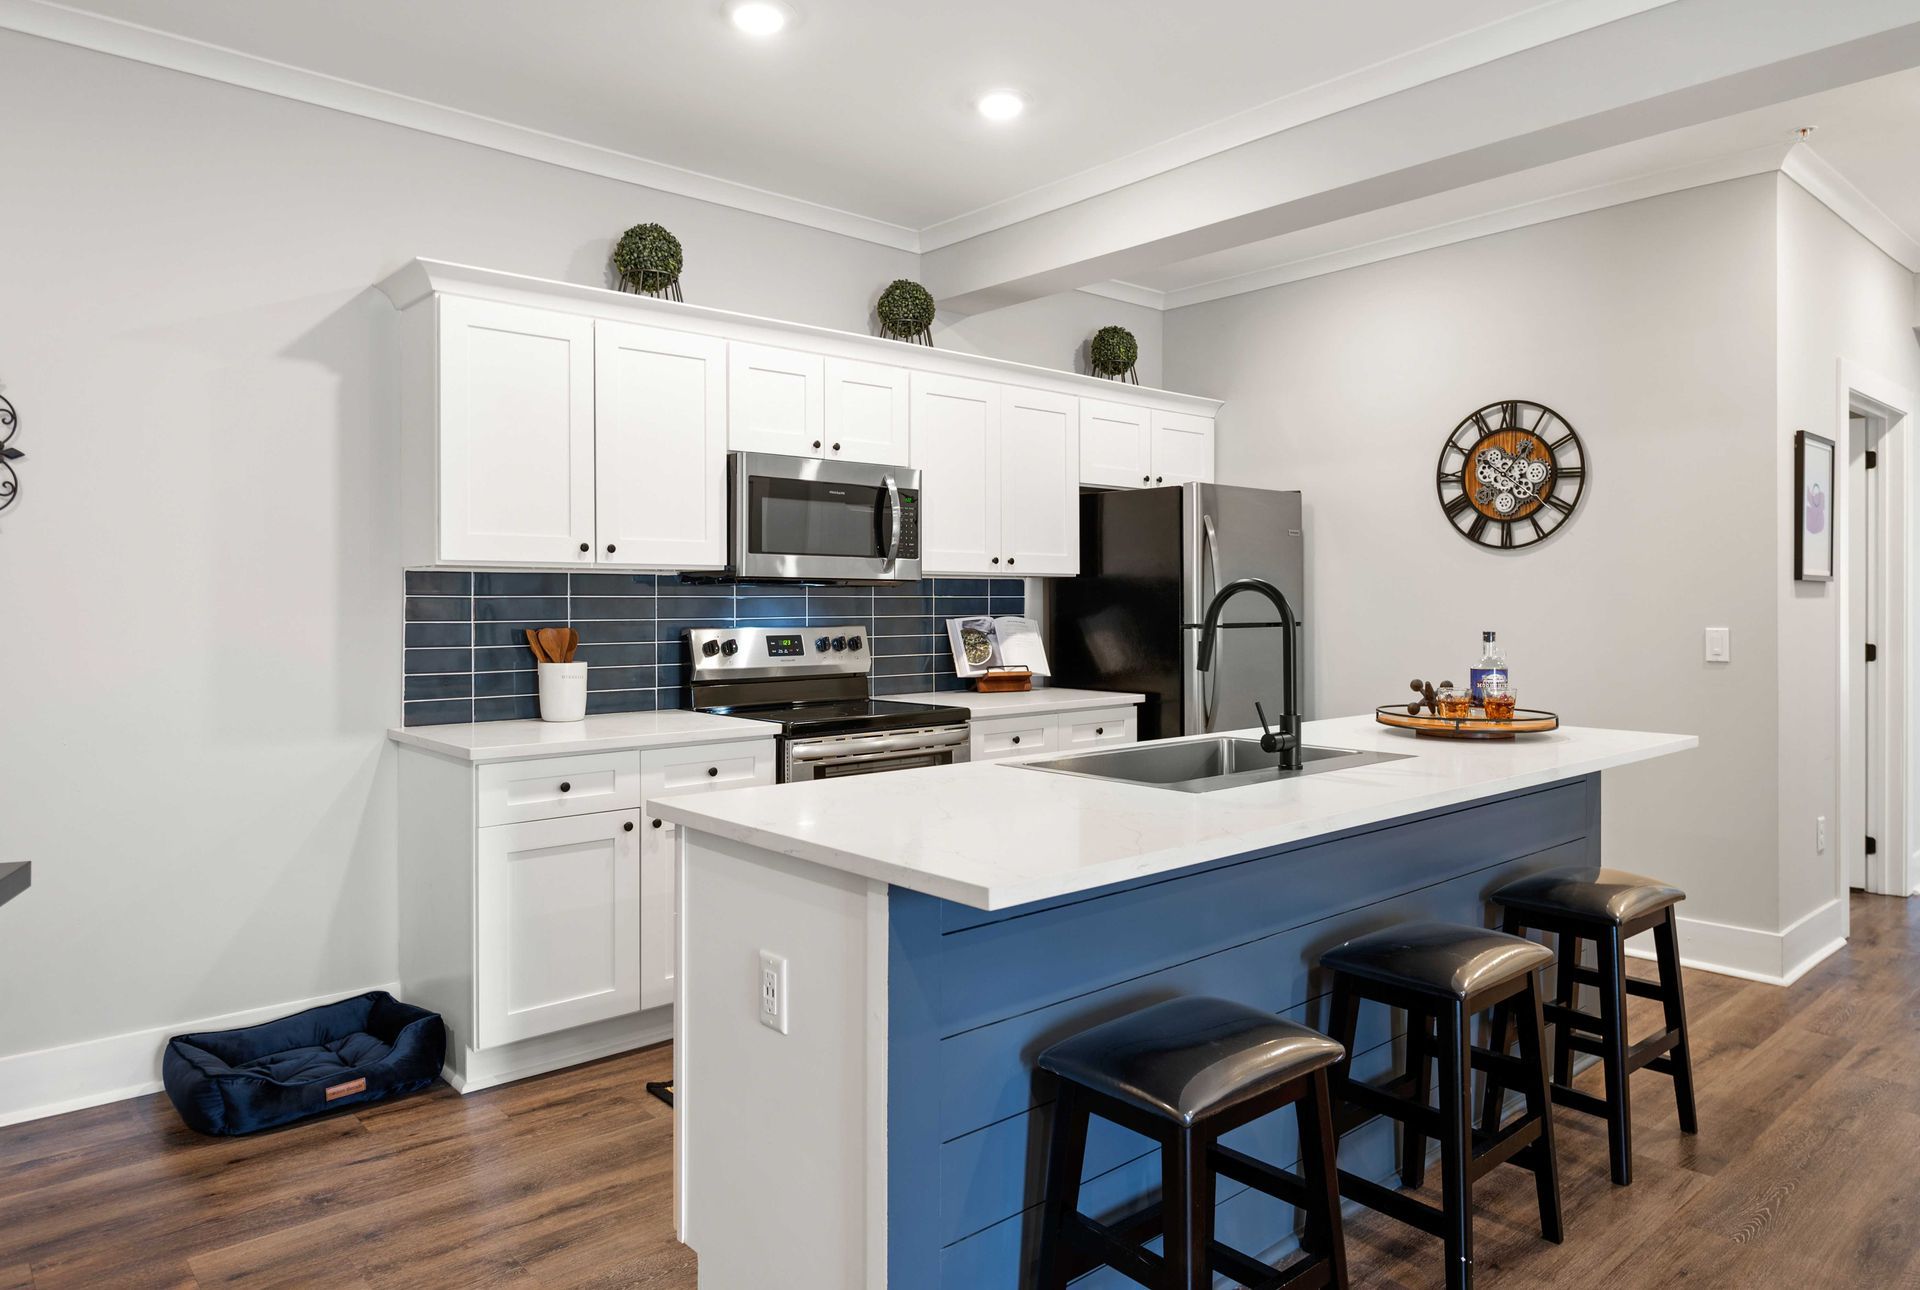 Apartment kitchen with white cabinets, stainless steel appliances, and a blue island.